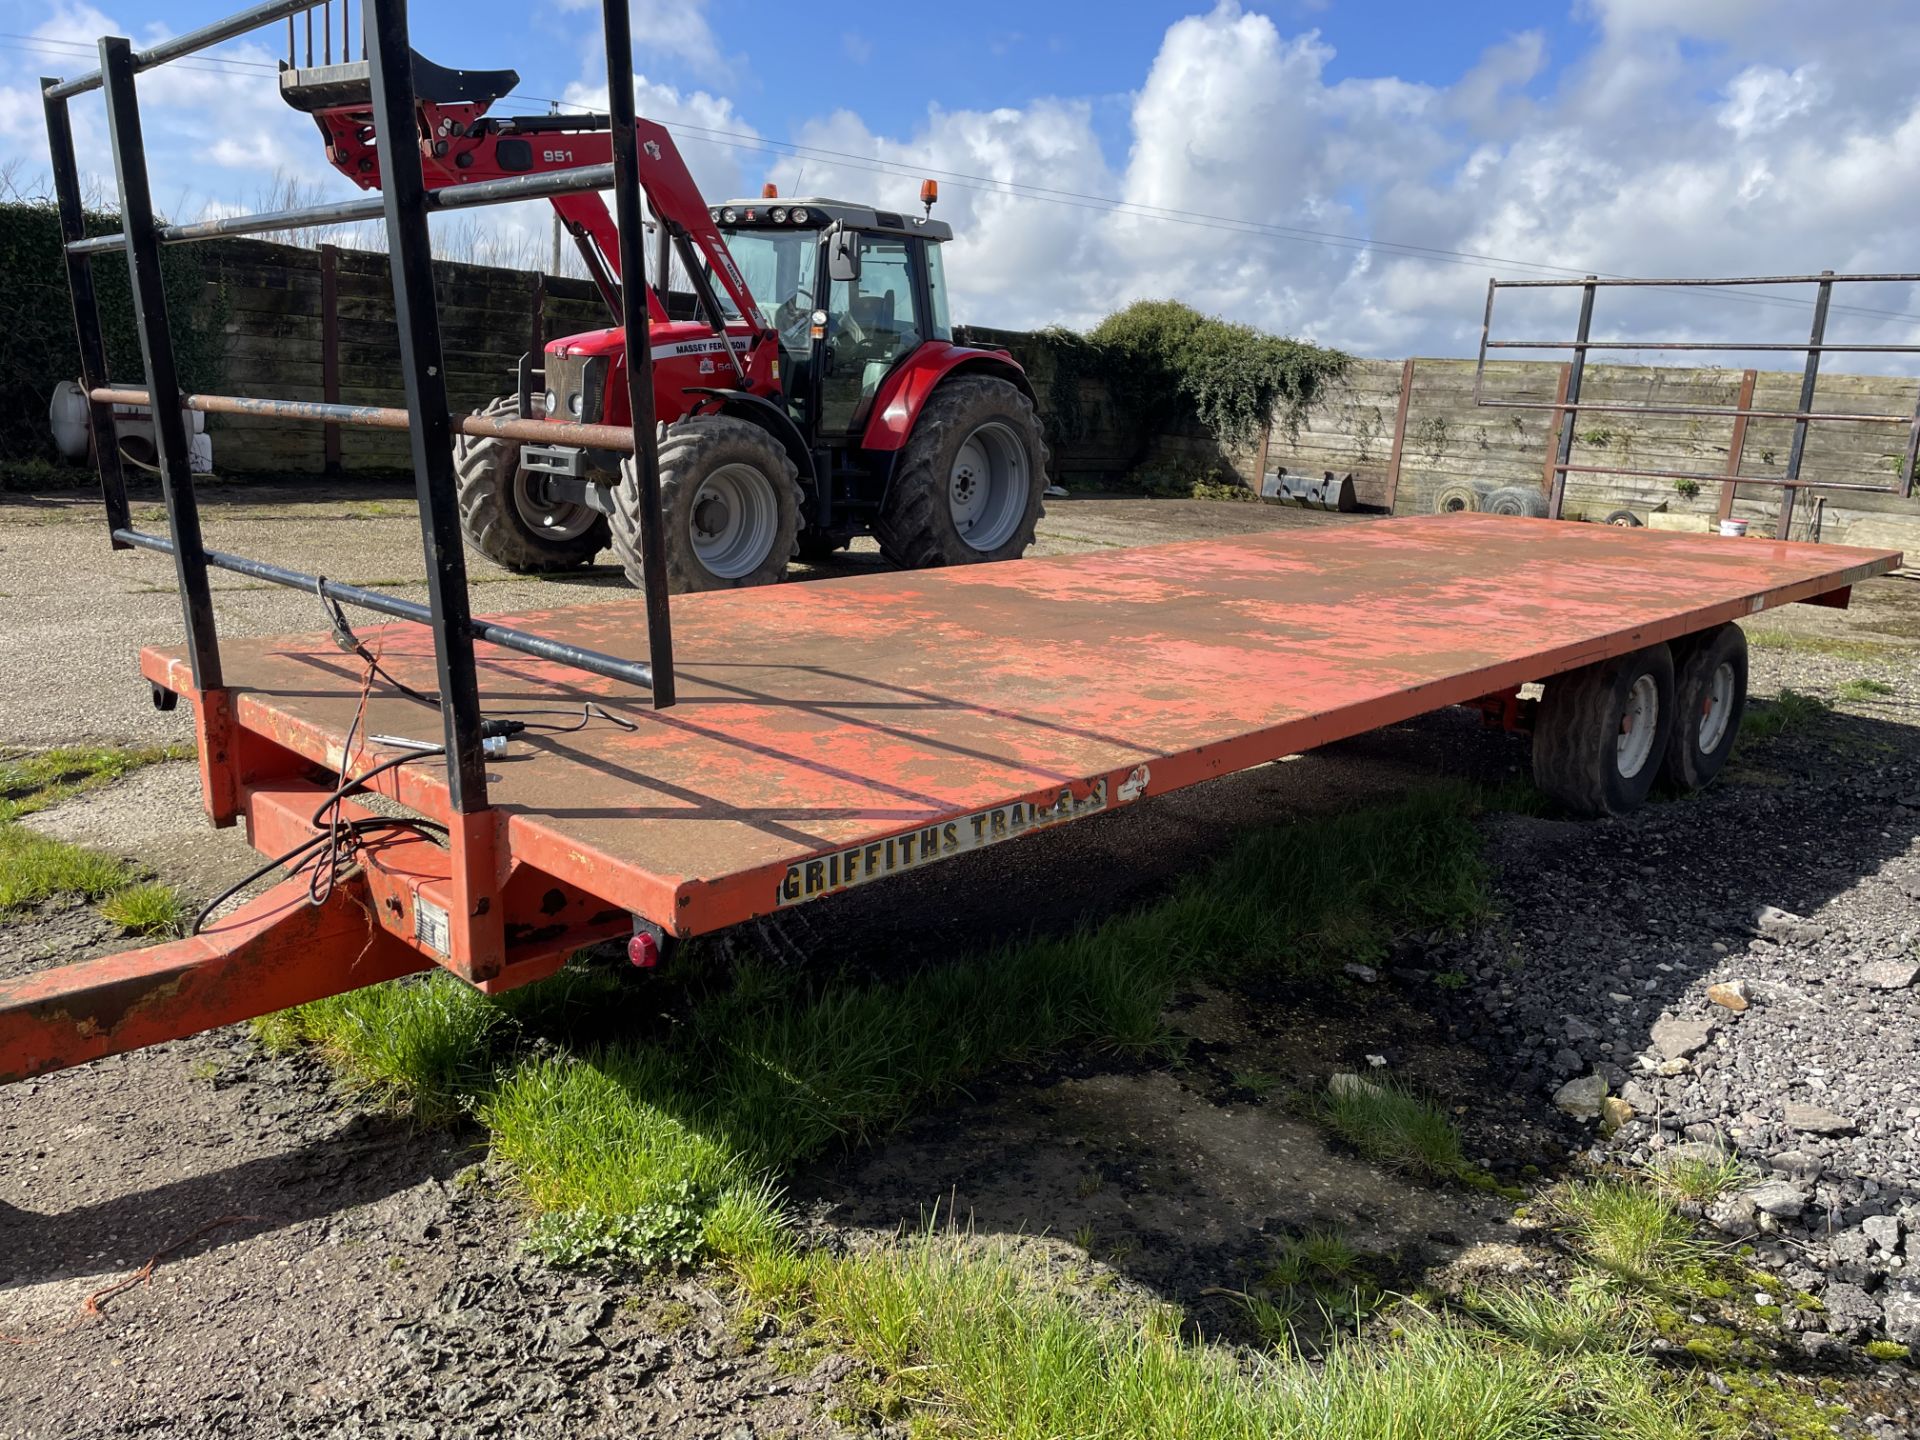 1995 Griffiths 8 ton 25' Bale Trailer with ladders front and rear - owned from new - Subject to VAT - Image 2 of 3